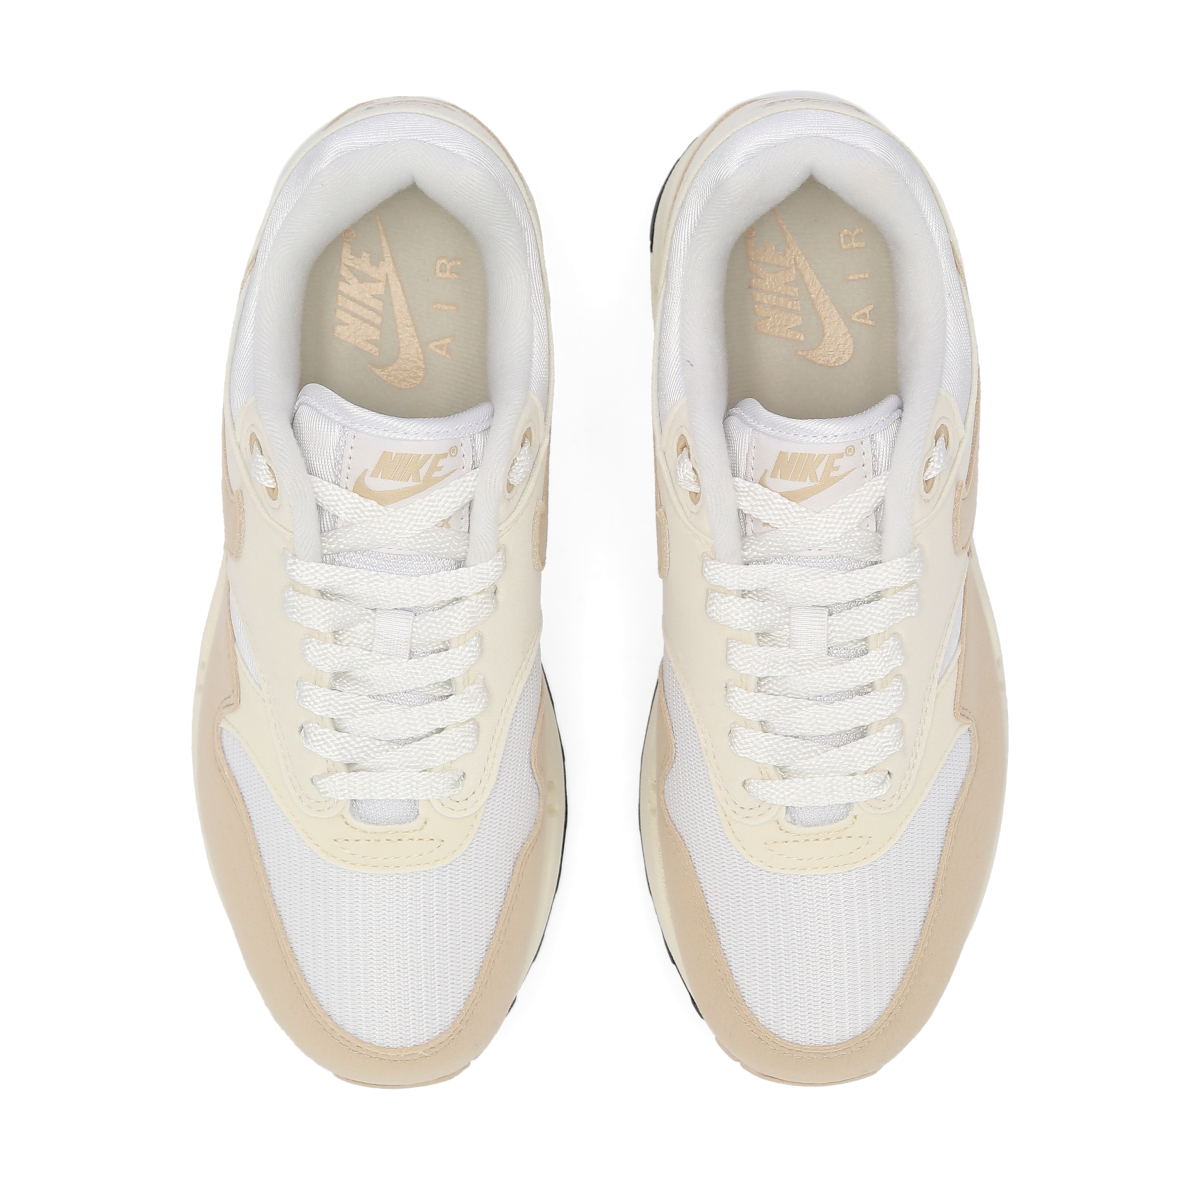 Zapatillas Nike Air Max 1 Pale Ivory Mujer,  image number null